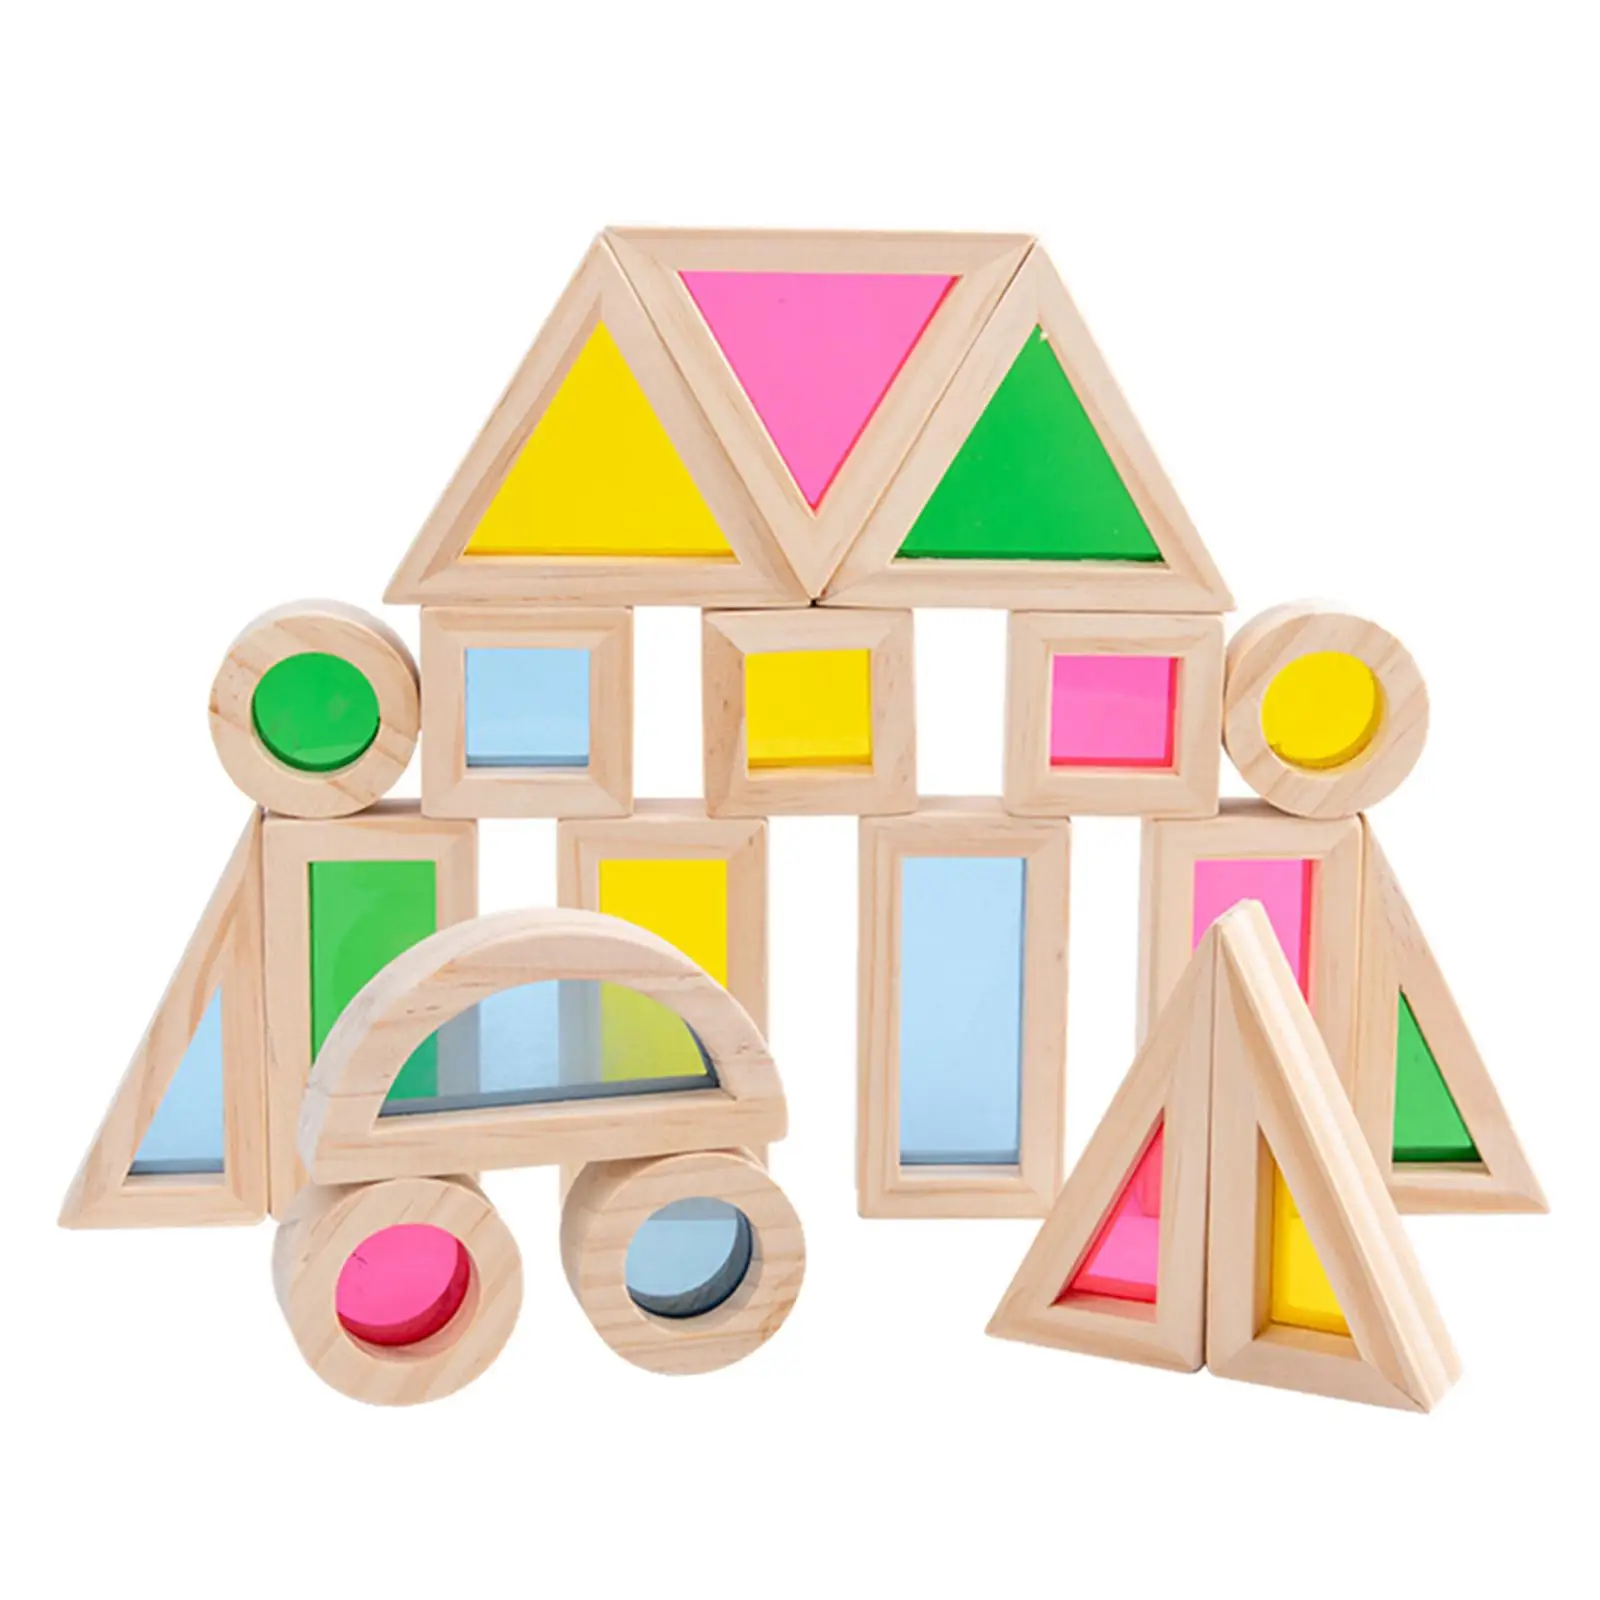 24 Pieces Stacking Blocks Kids Ages 2-4 Construction Toys Boys Girls Educational Toys Parent Child Game Wood Rainbow Blocks